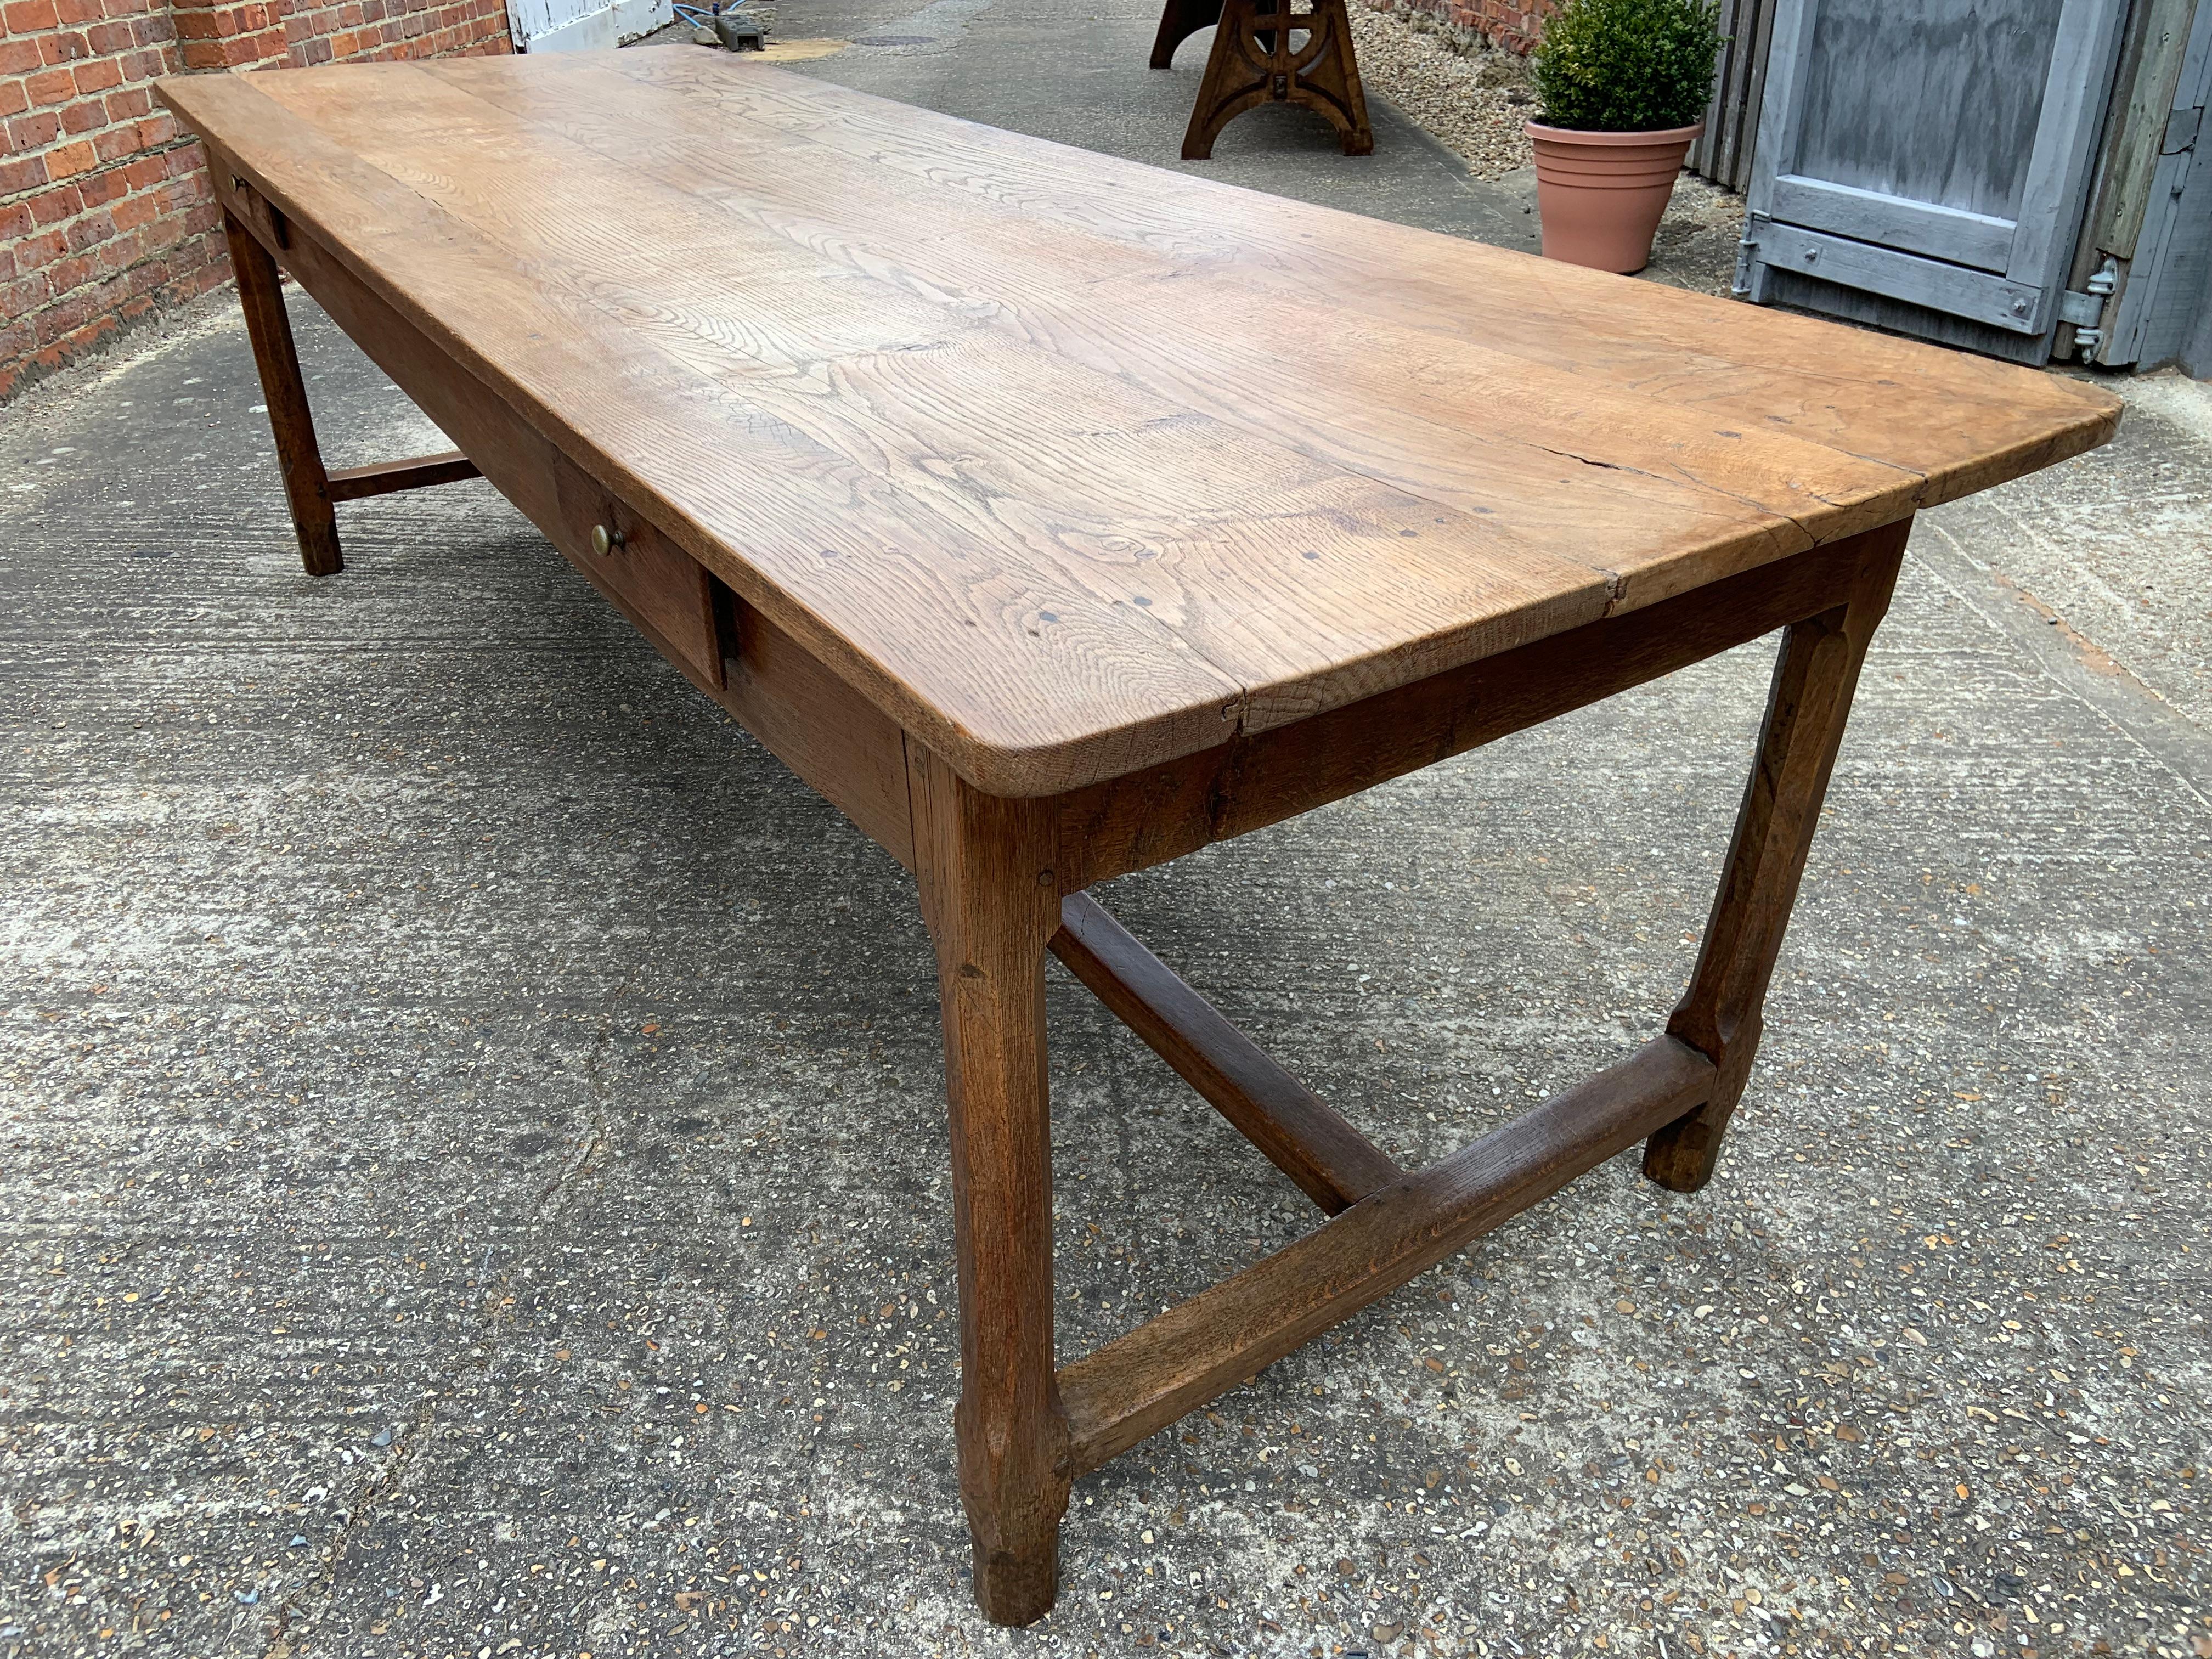 18th century oak farmhouse table with centre stretcher and two side drawers. Beautiful pale coloured top with wide planks and a lot of character. This table has gorgeous patination and stands very well in proportions.
 